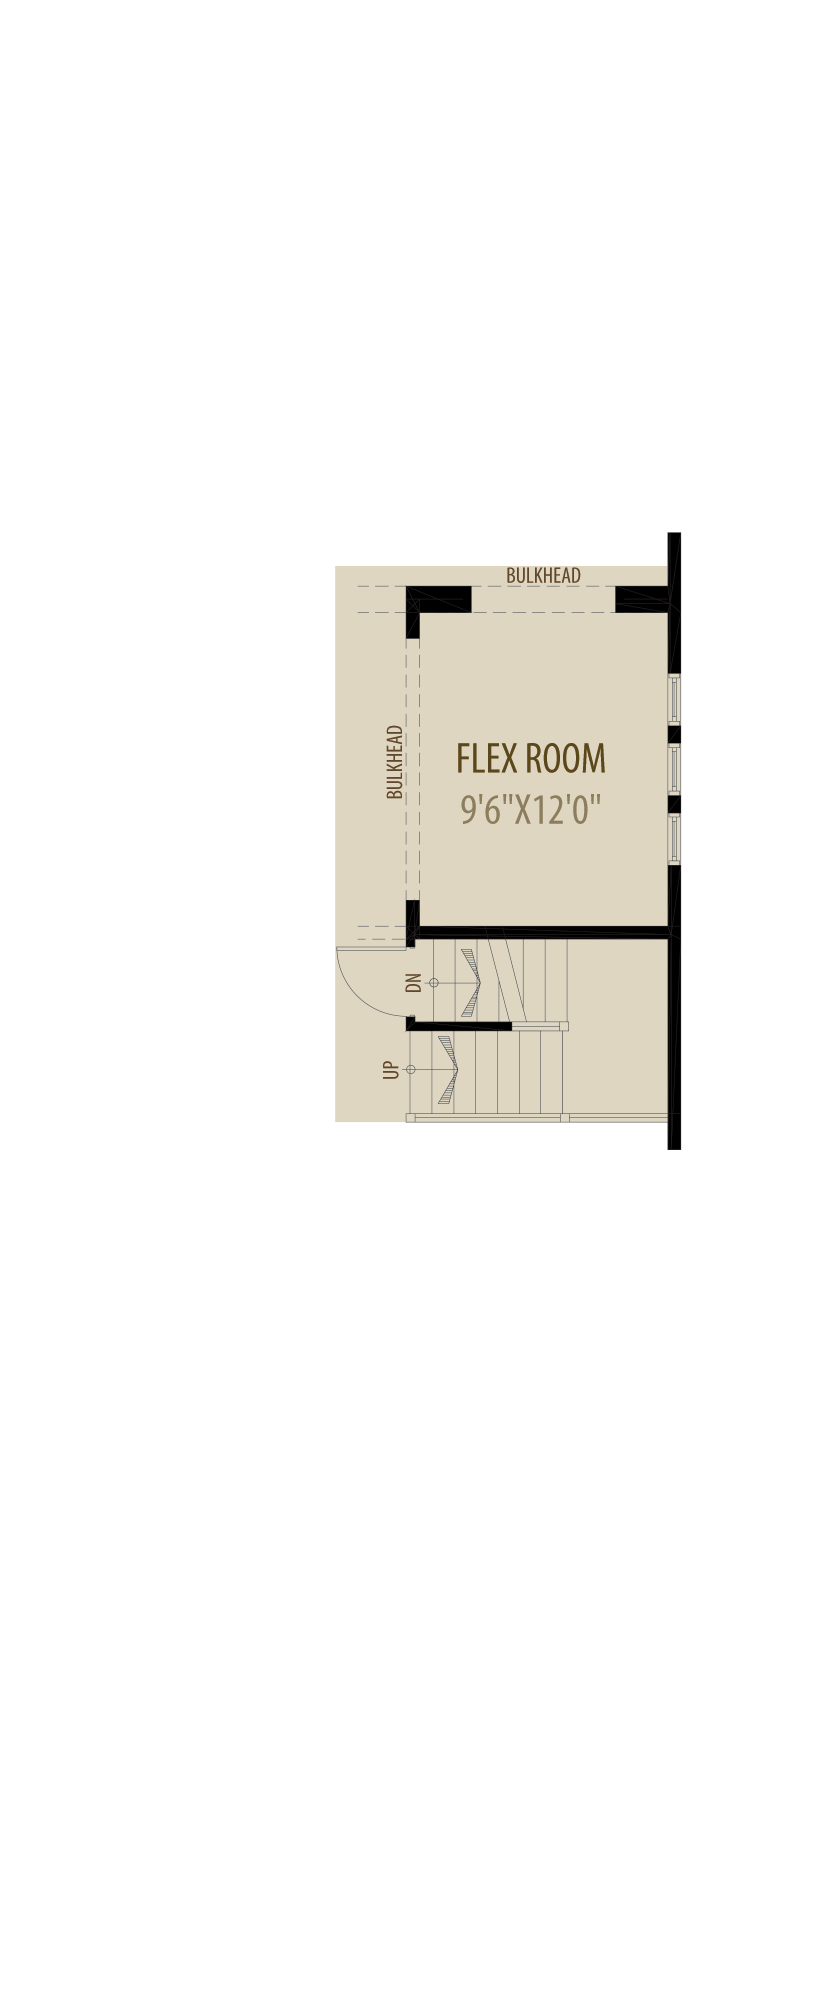 Flex Room adds 120 sq ft to Main removes 5 sq ft from Upper